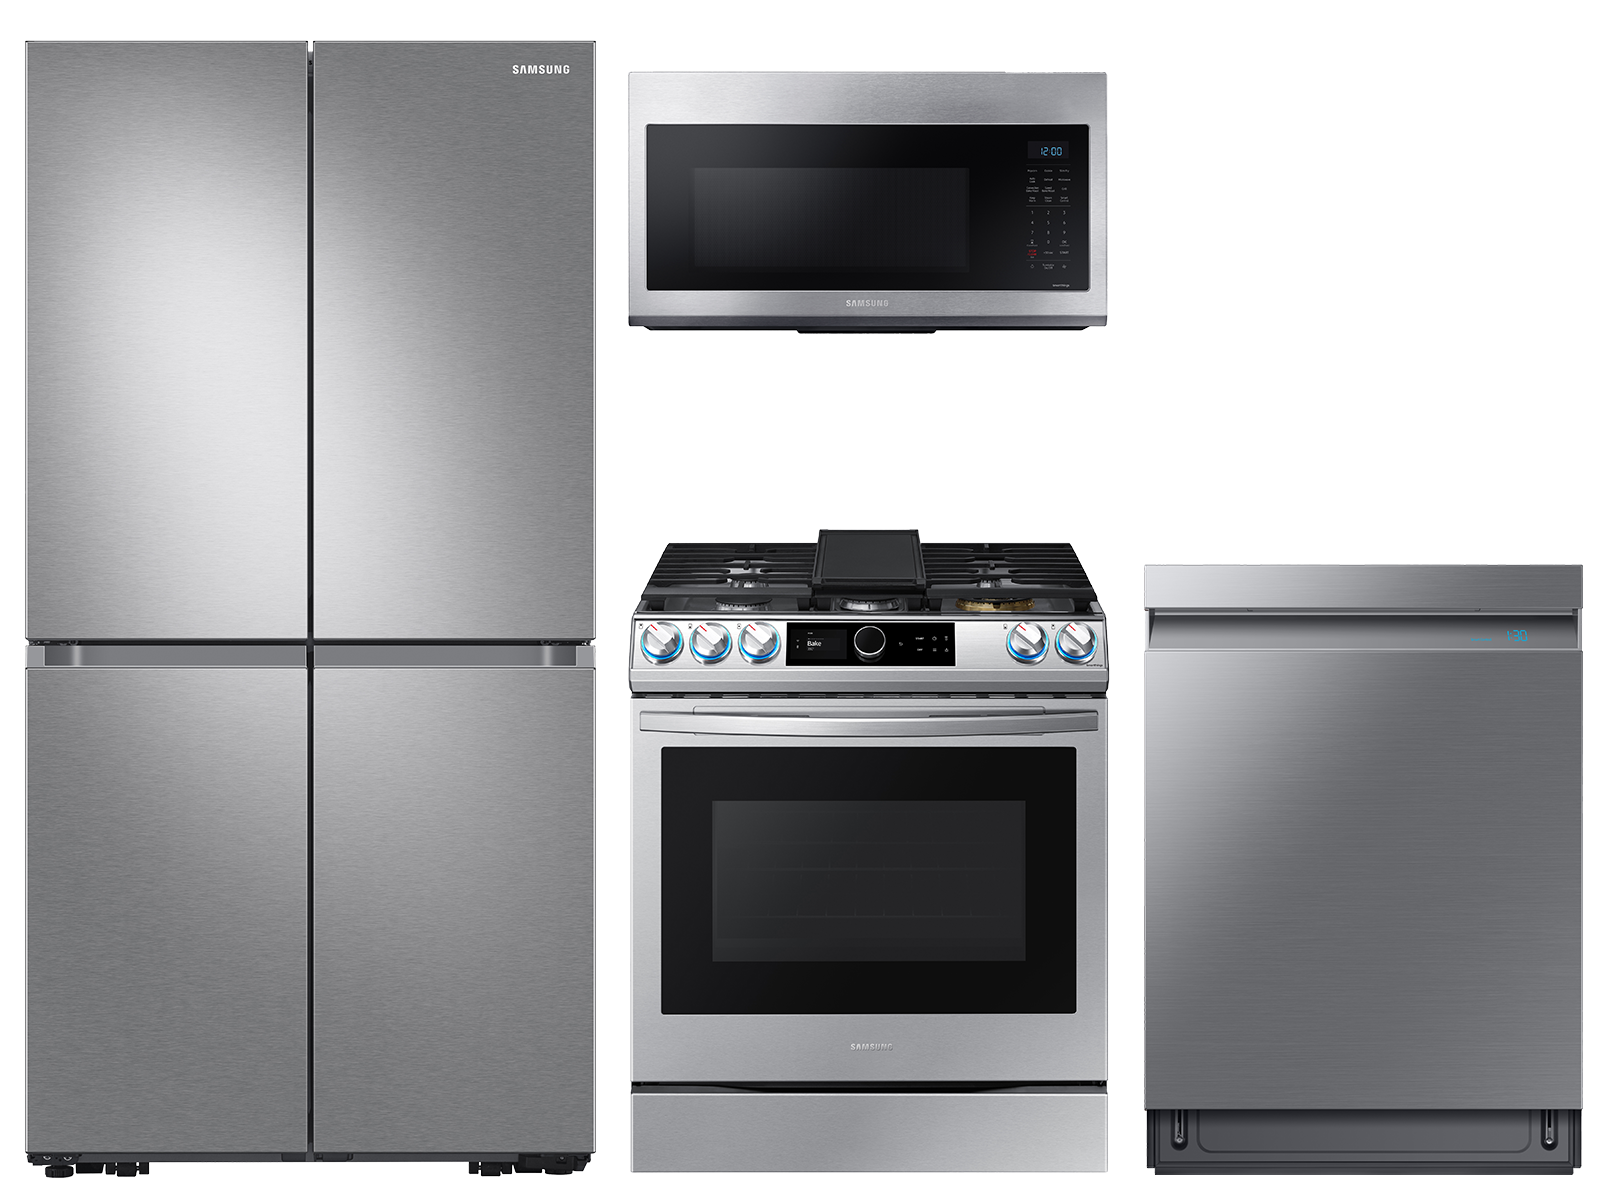 Samsung 23 cu. ft. counter depth 4-Door refrigerator, gas range, convection microwave and Smart Linear dishwasher package(BNDL-1623867899645)